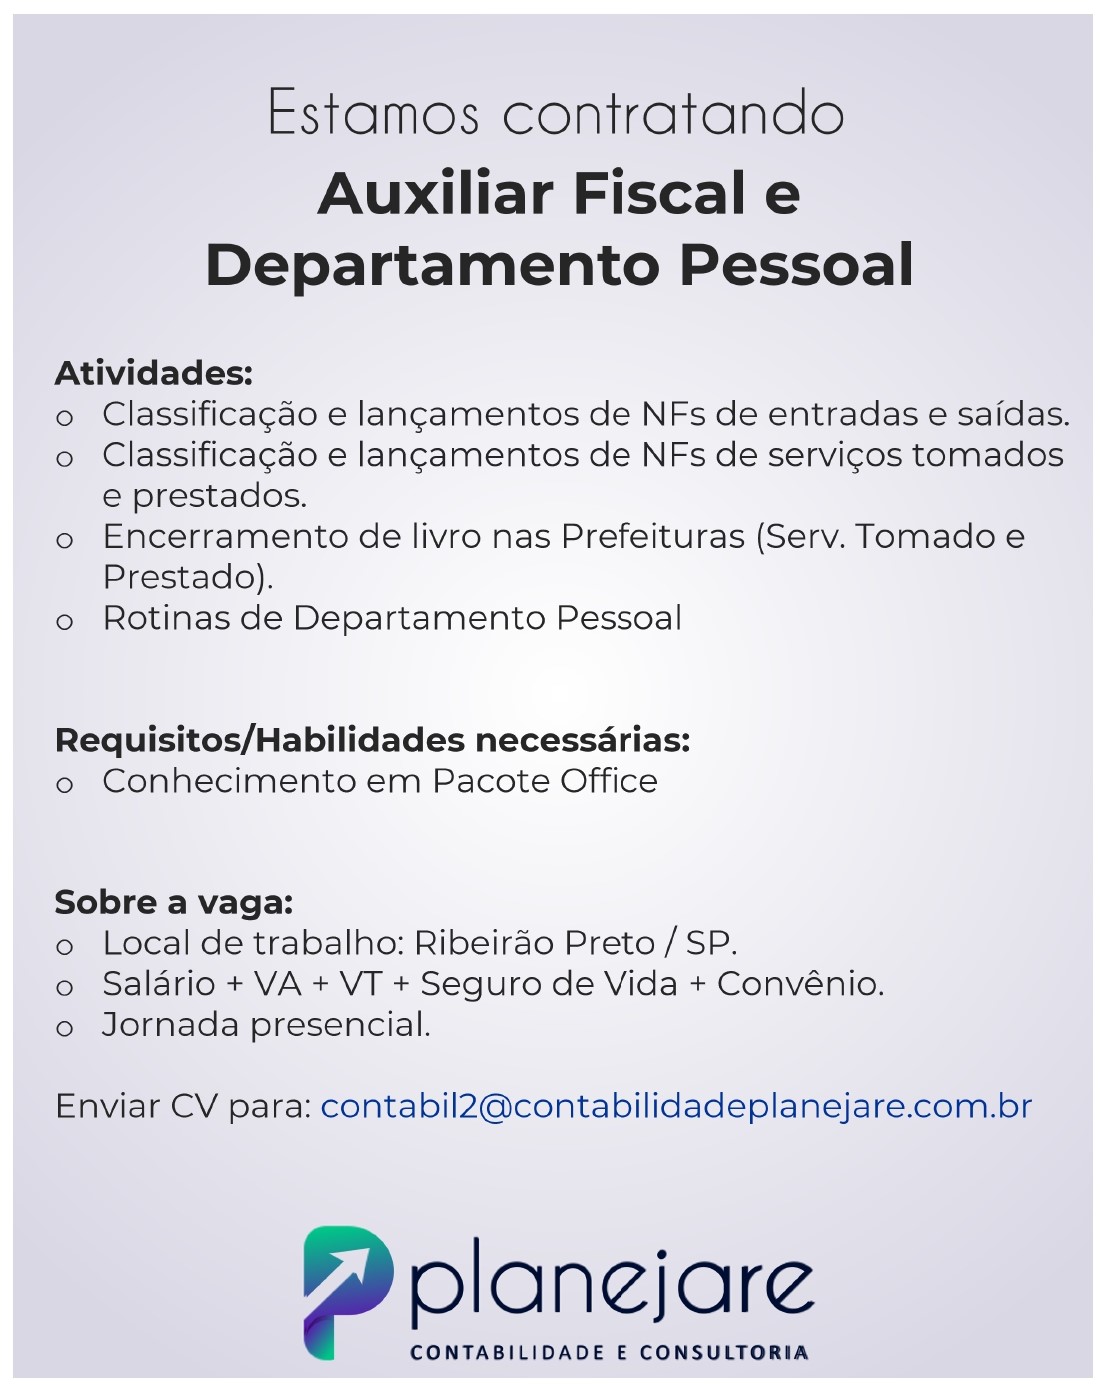 Planejare_Auxiliar_Fiscal_page-0001.jpg